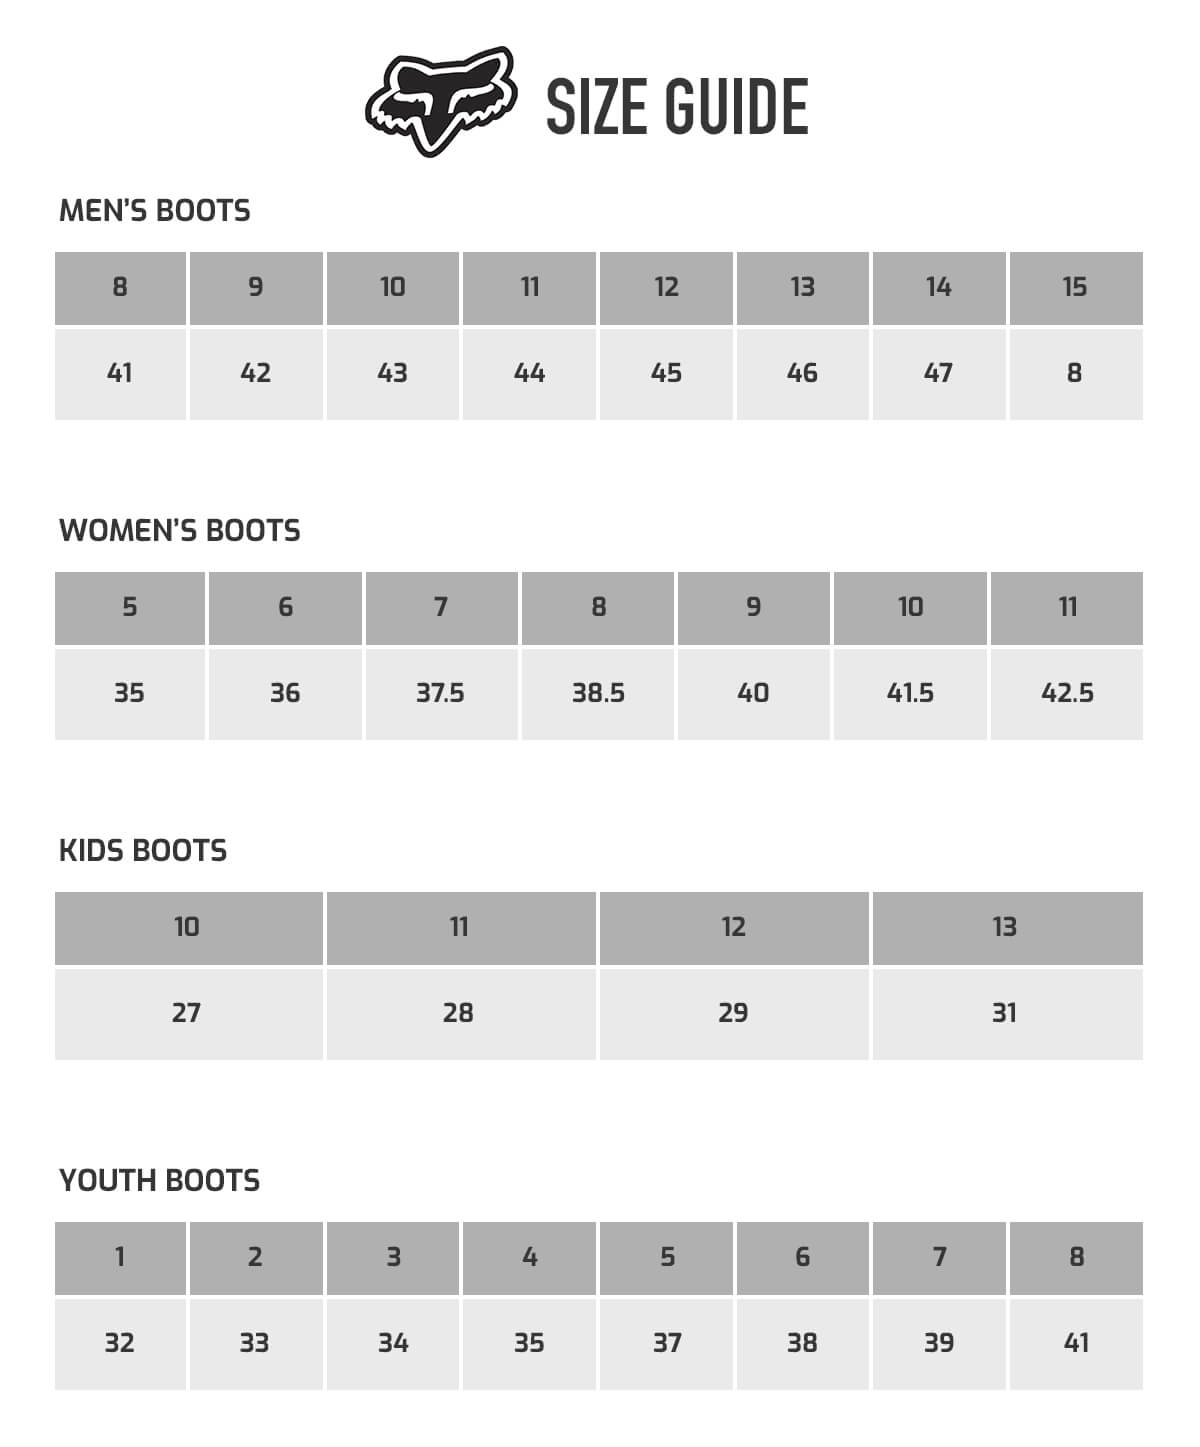 Youth Riding Gear Size Chart